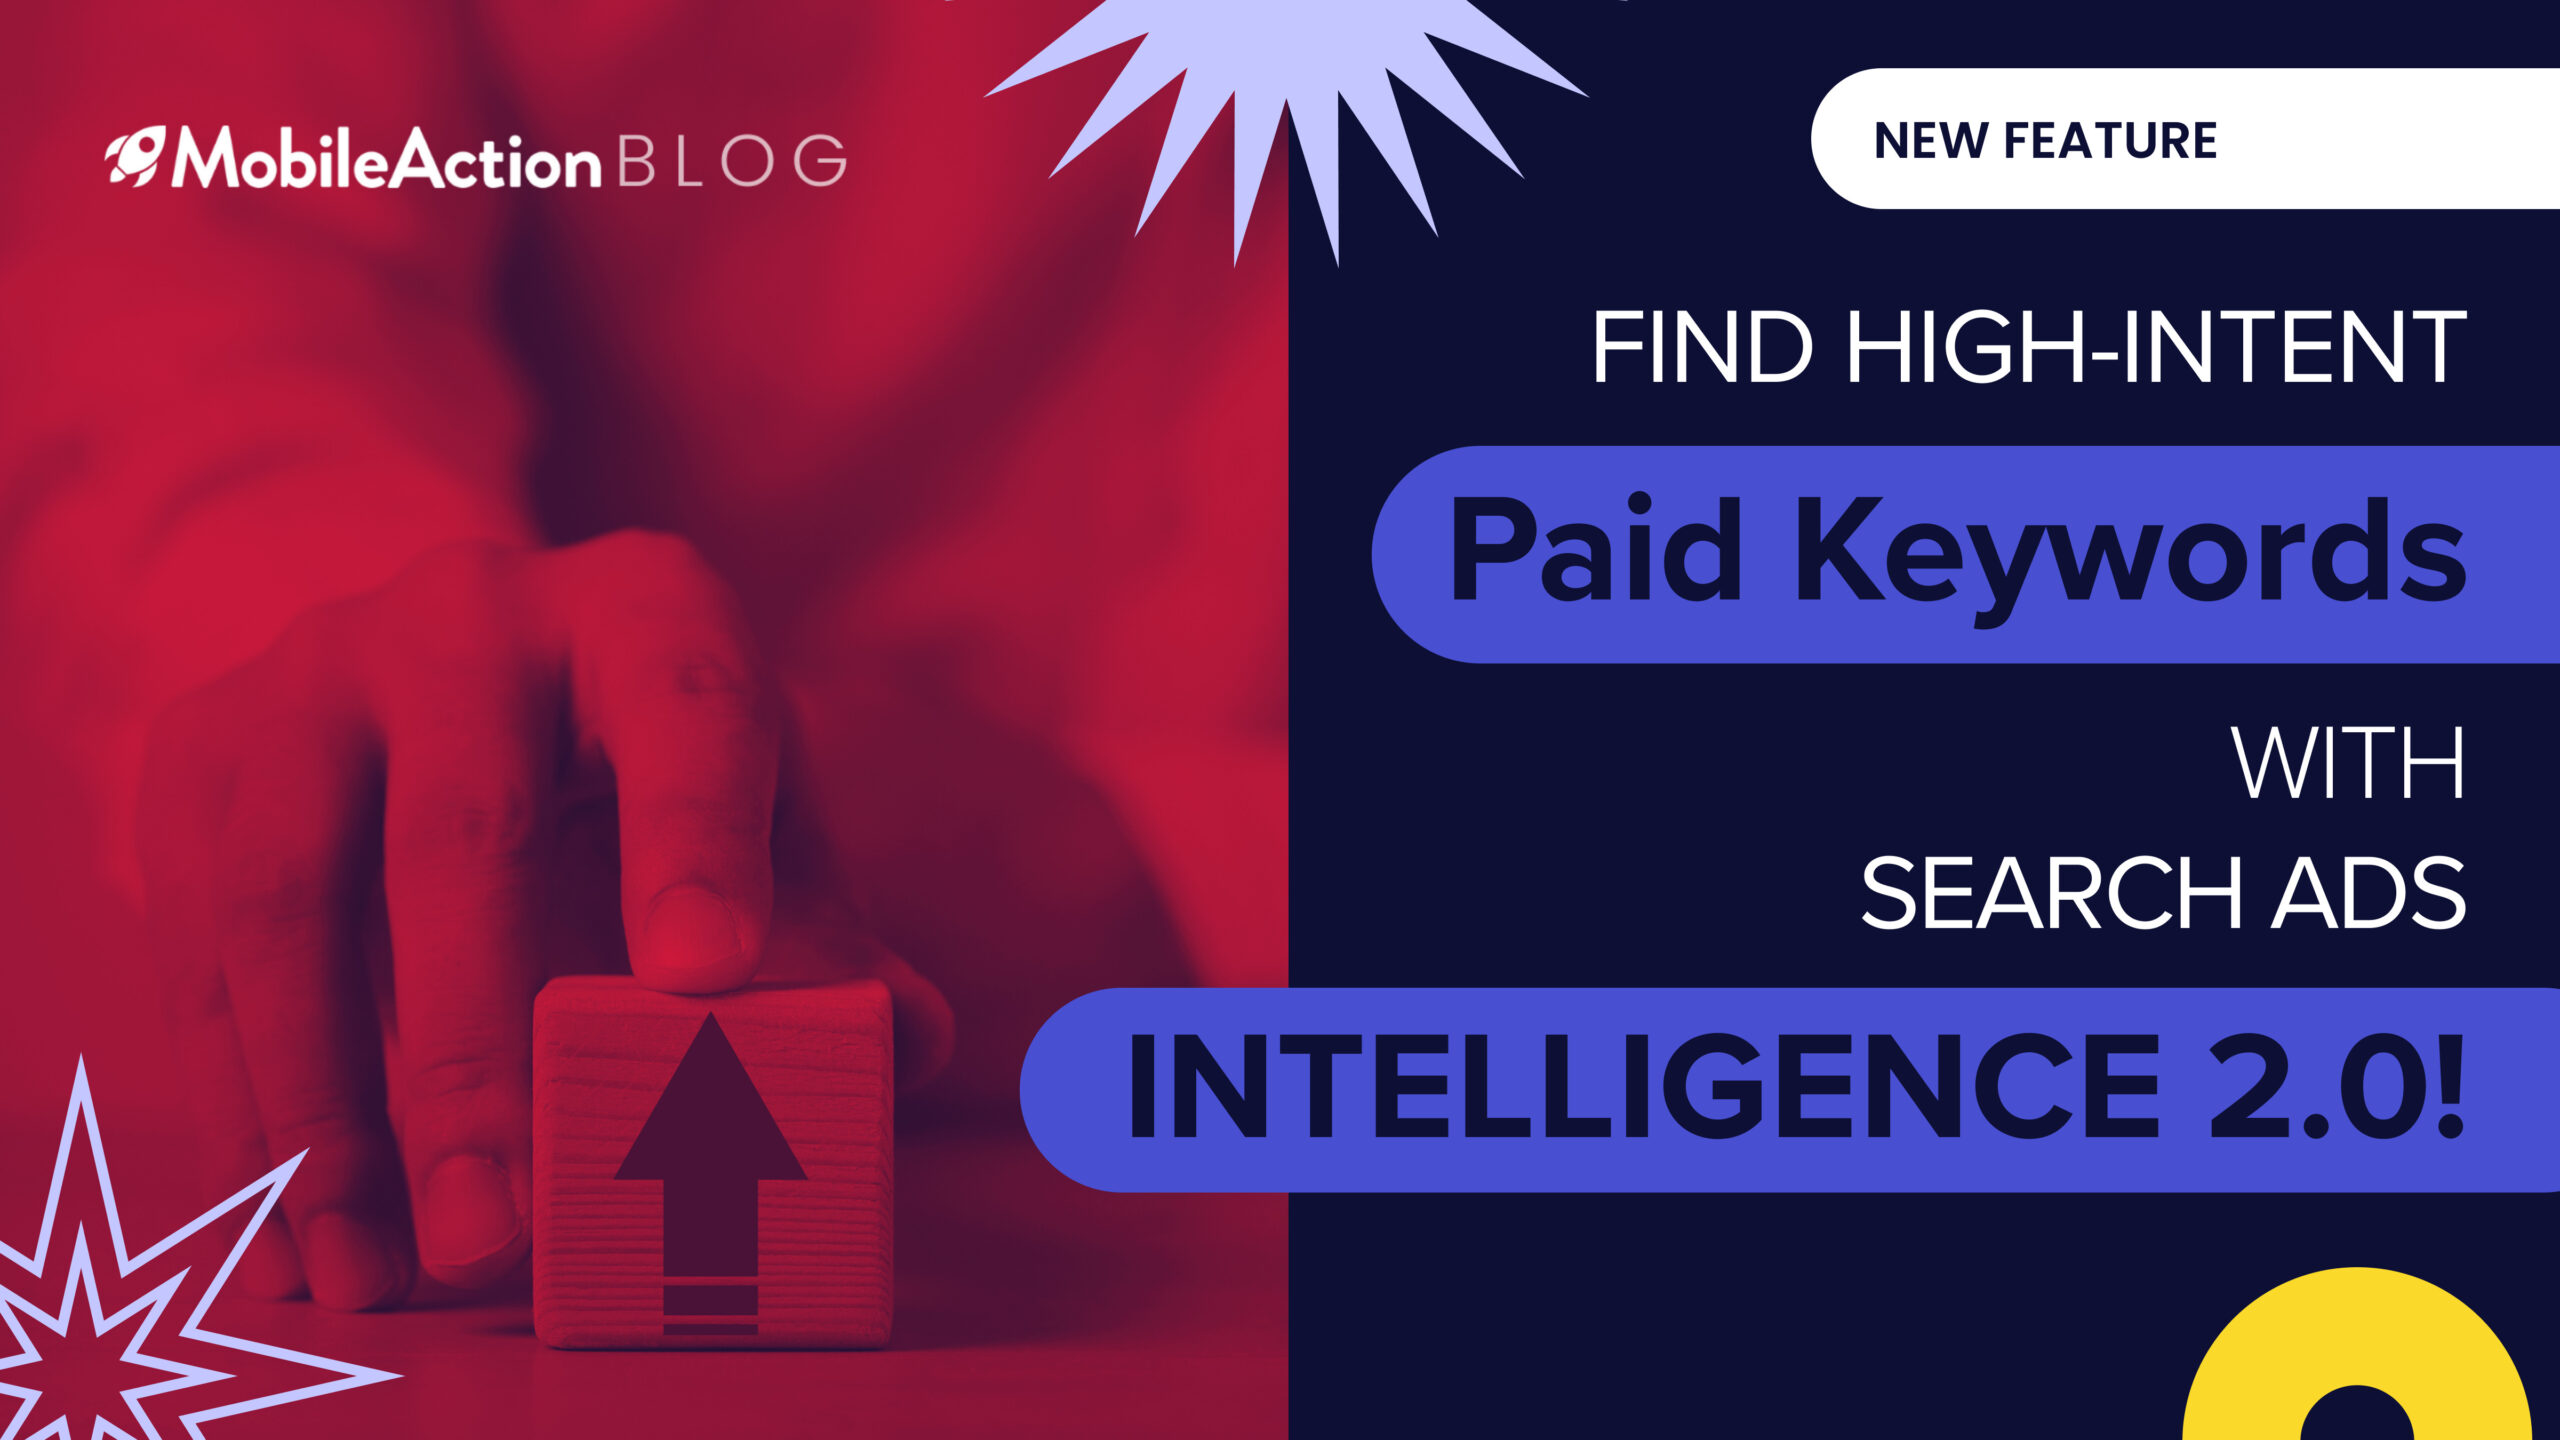 Find High-Intent Paid Keywords with Search Ads Intelligence 2.0!